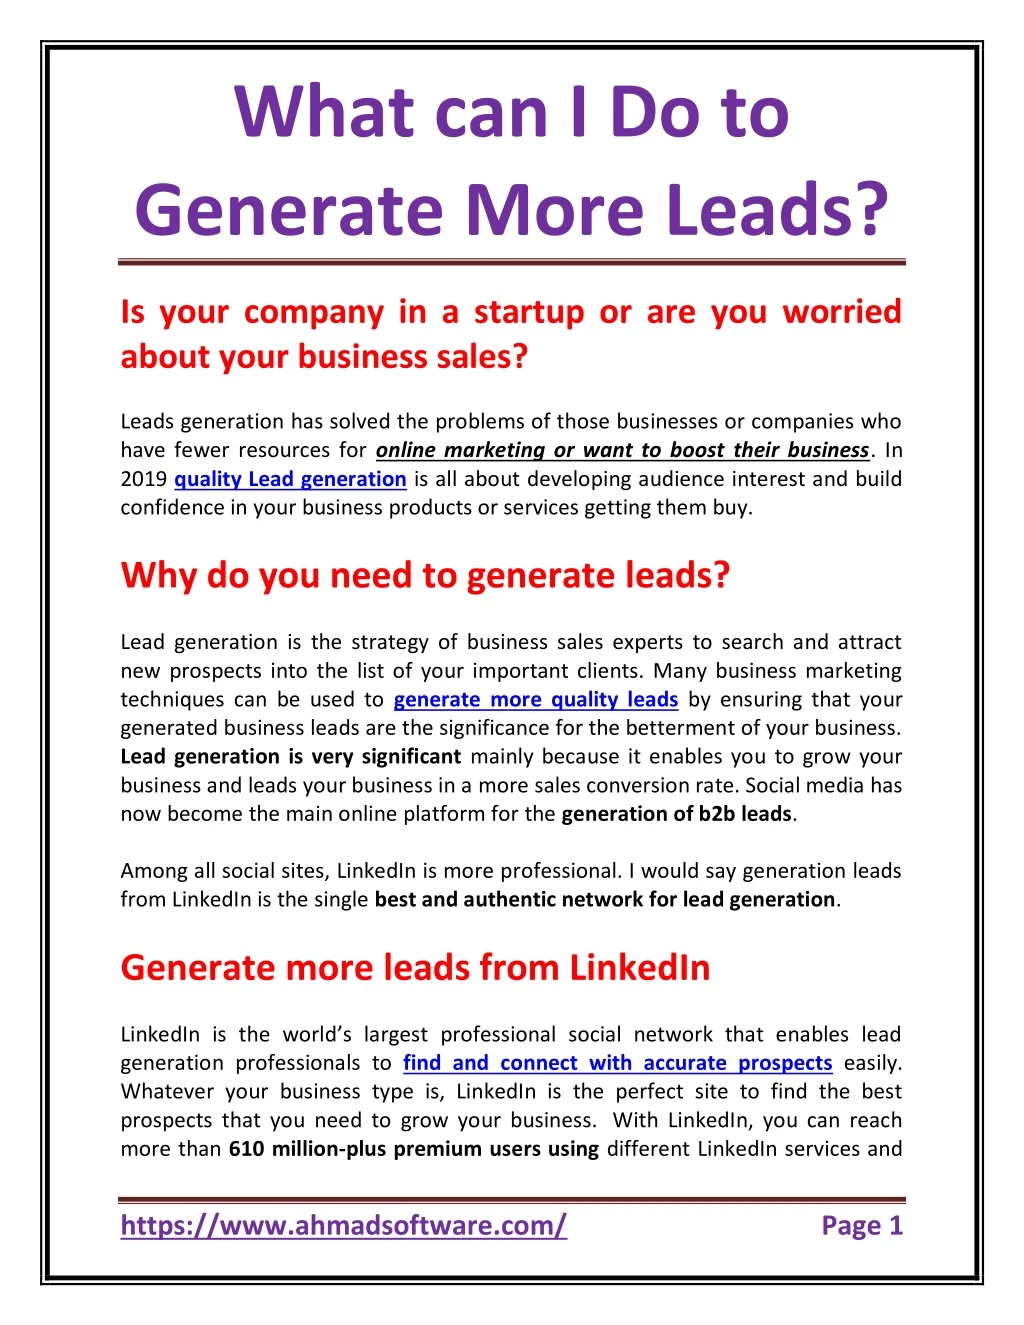 what can i do to generate more leads